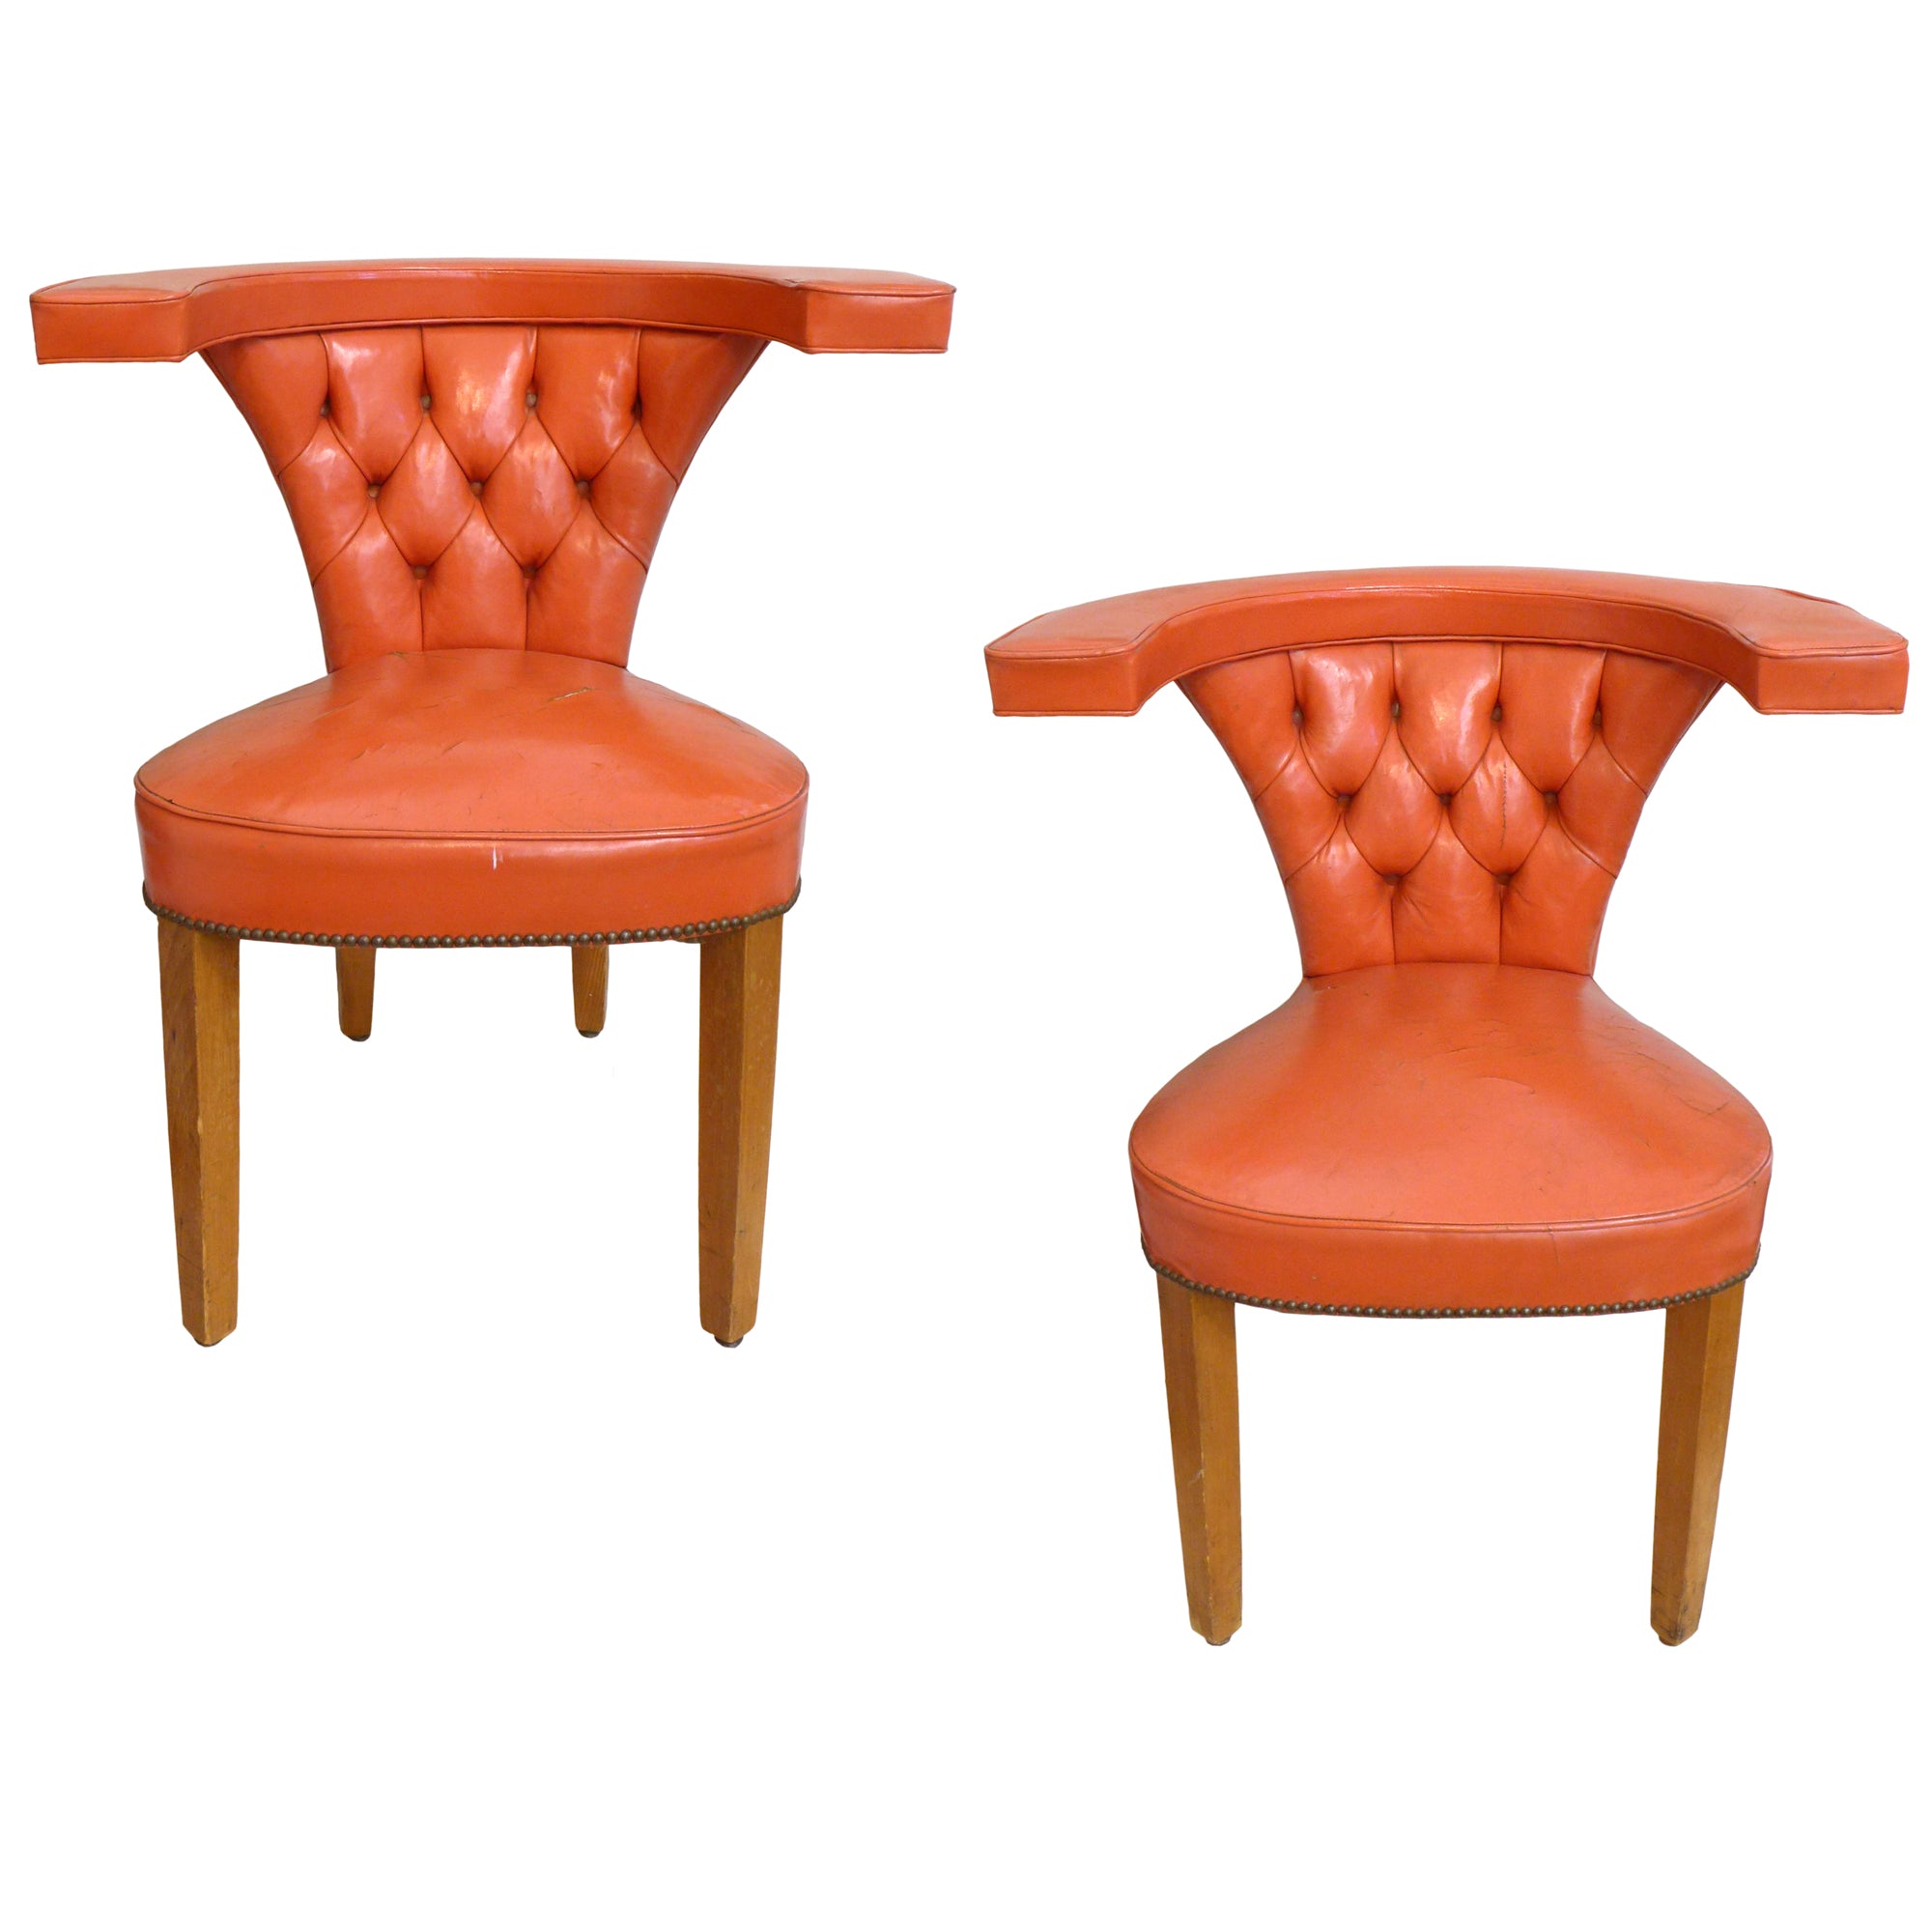 Pair of Tufted Leather Cockfighting Chairs